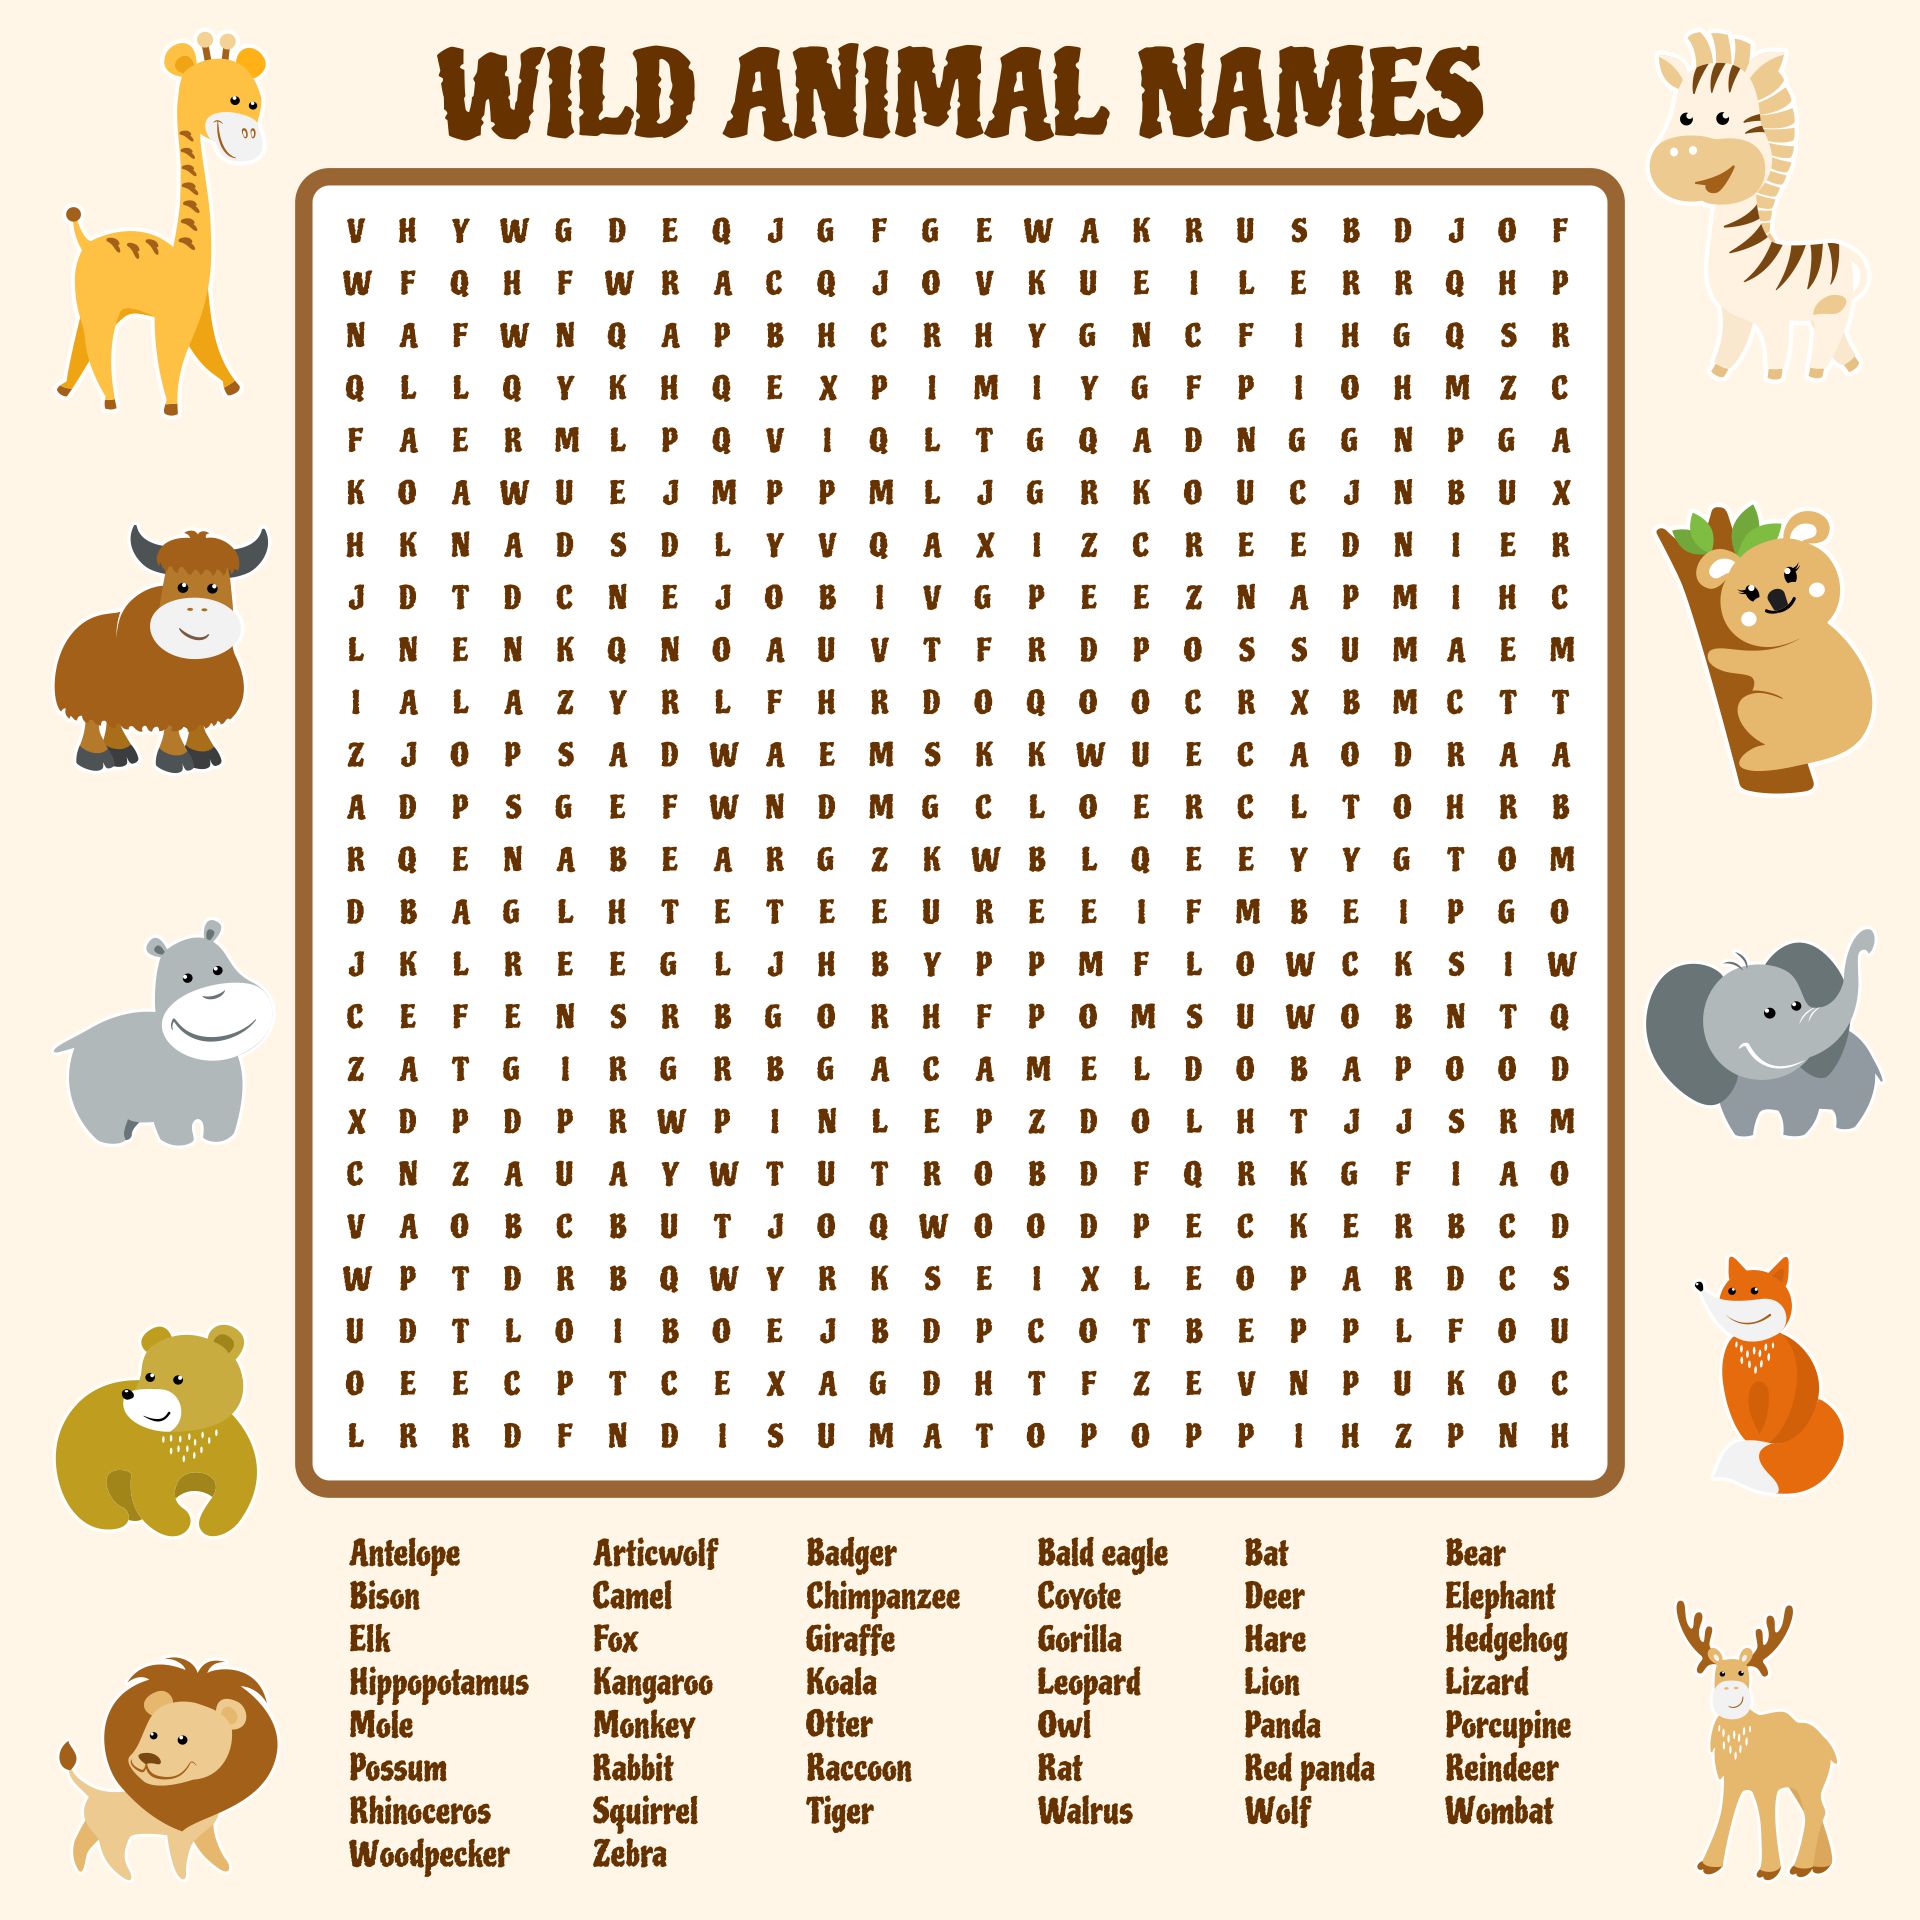 Animal Word Search Puzzles Printable